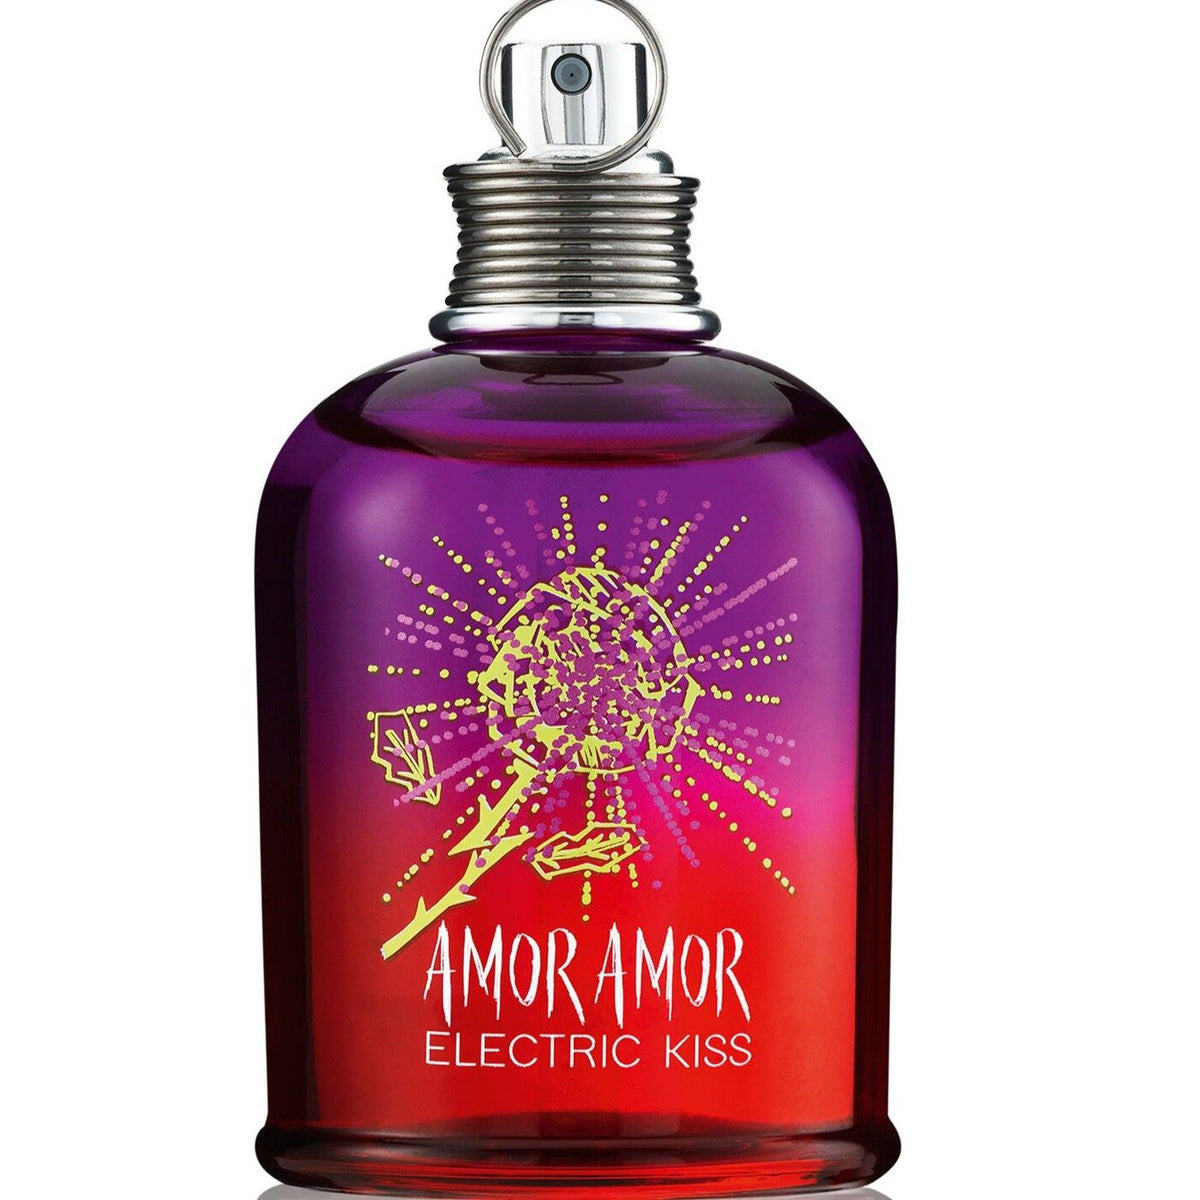 Amor Amor Electric Kiss Cacharel Edt 30 ml Mujer